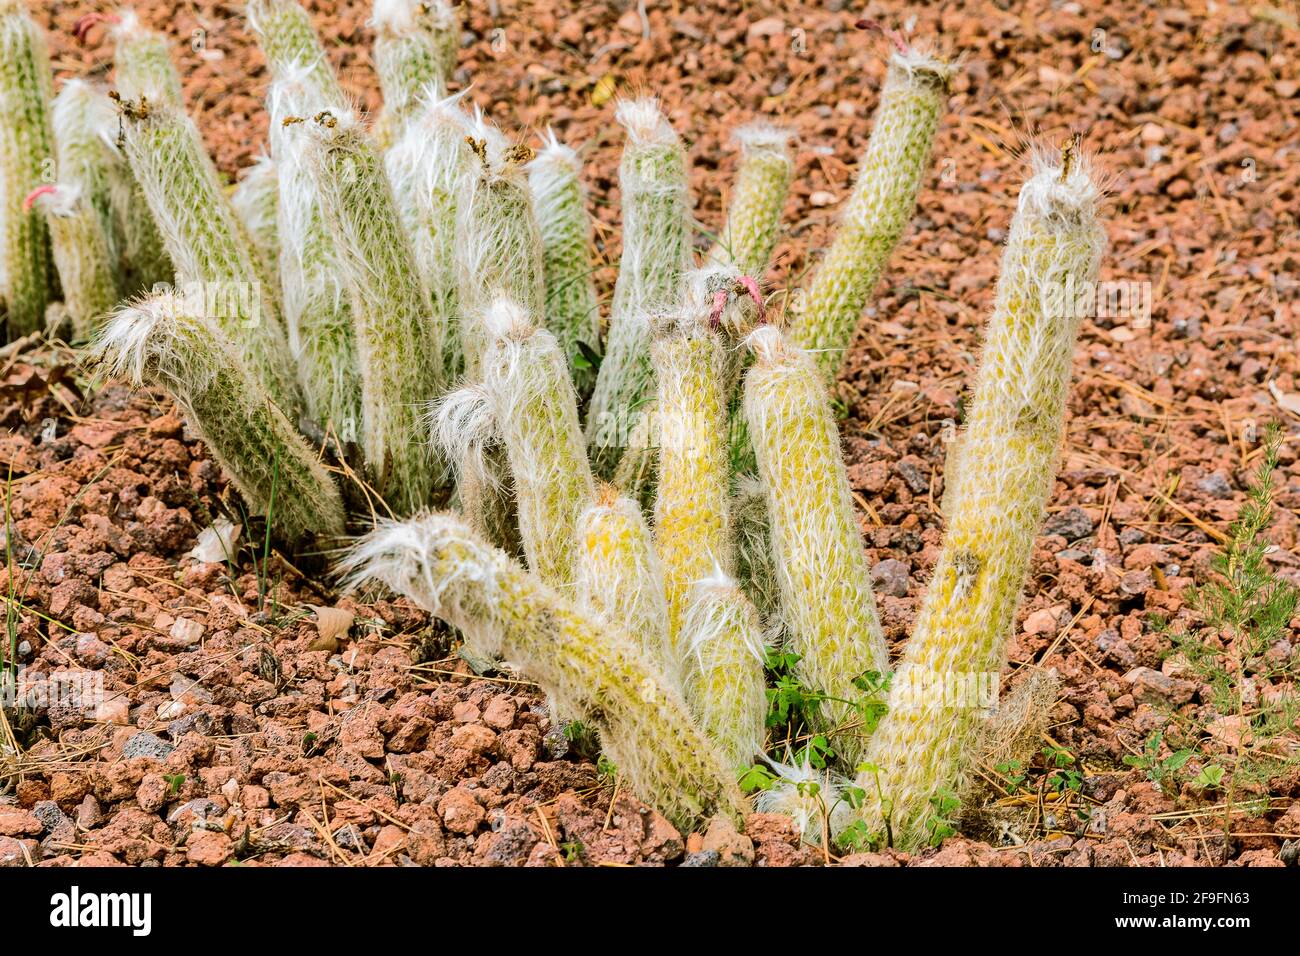 several cactus plants Oreocereus celsianus from the desert of Bolivia, Chille and Peru without flowers in autumn. Planted in the botanical garden on s Stock Photo